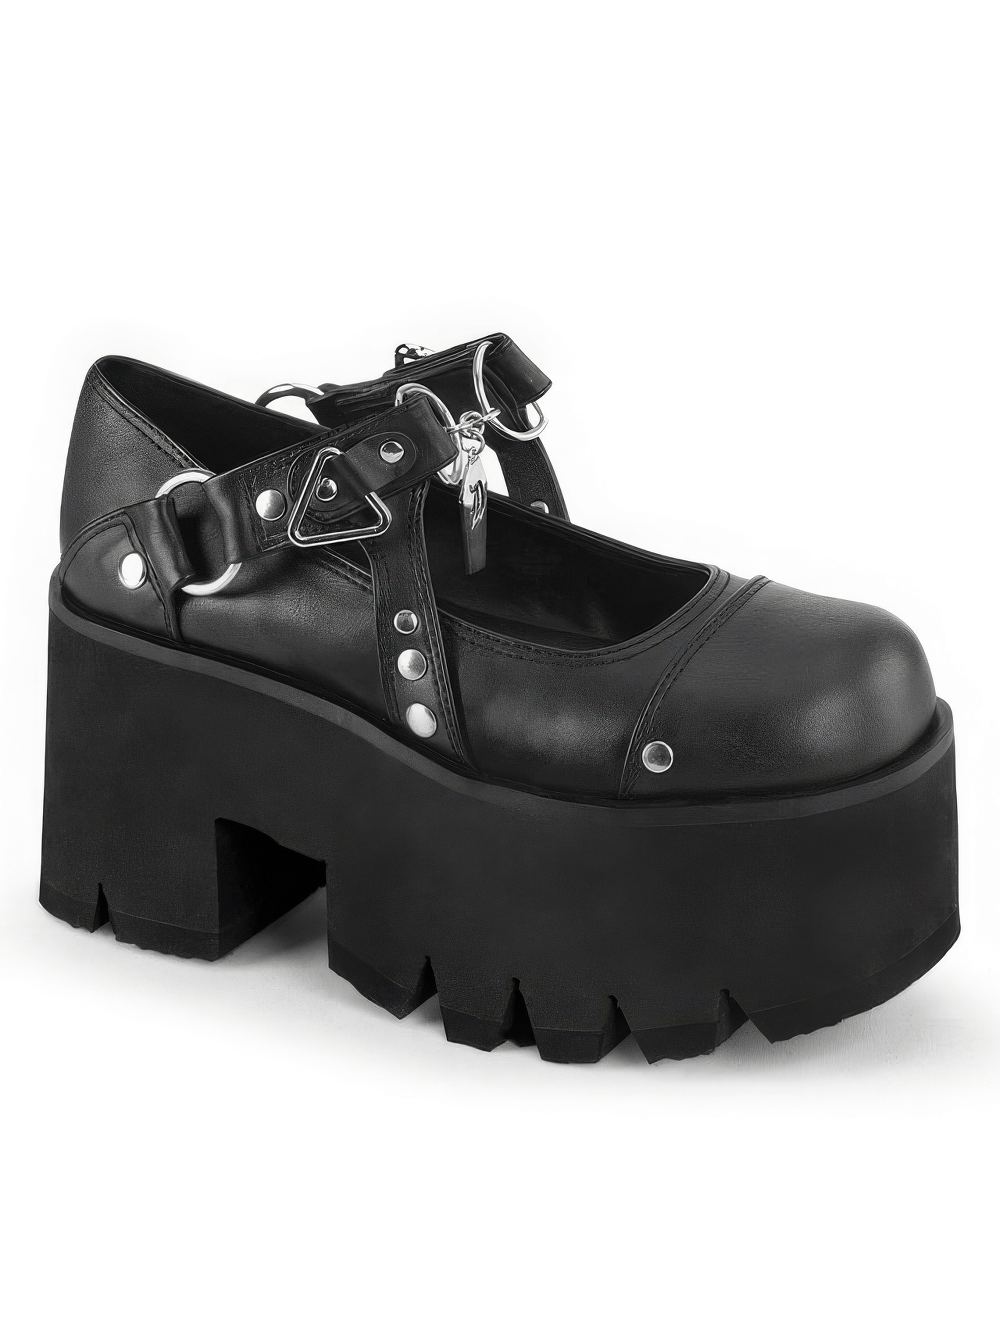 DEMONIA Black Chunky Heel Platform Boots with Metal Accents